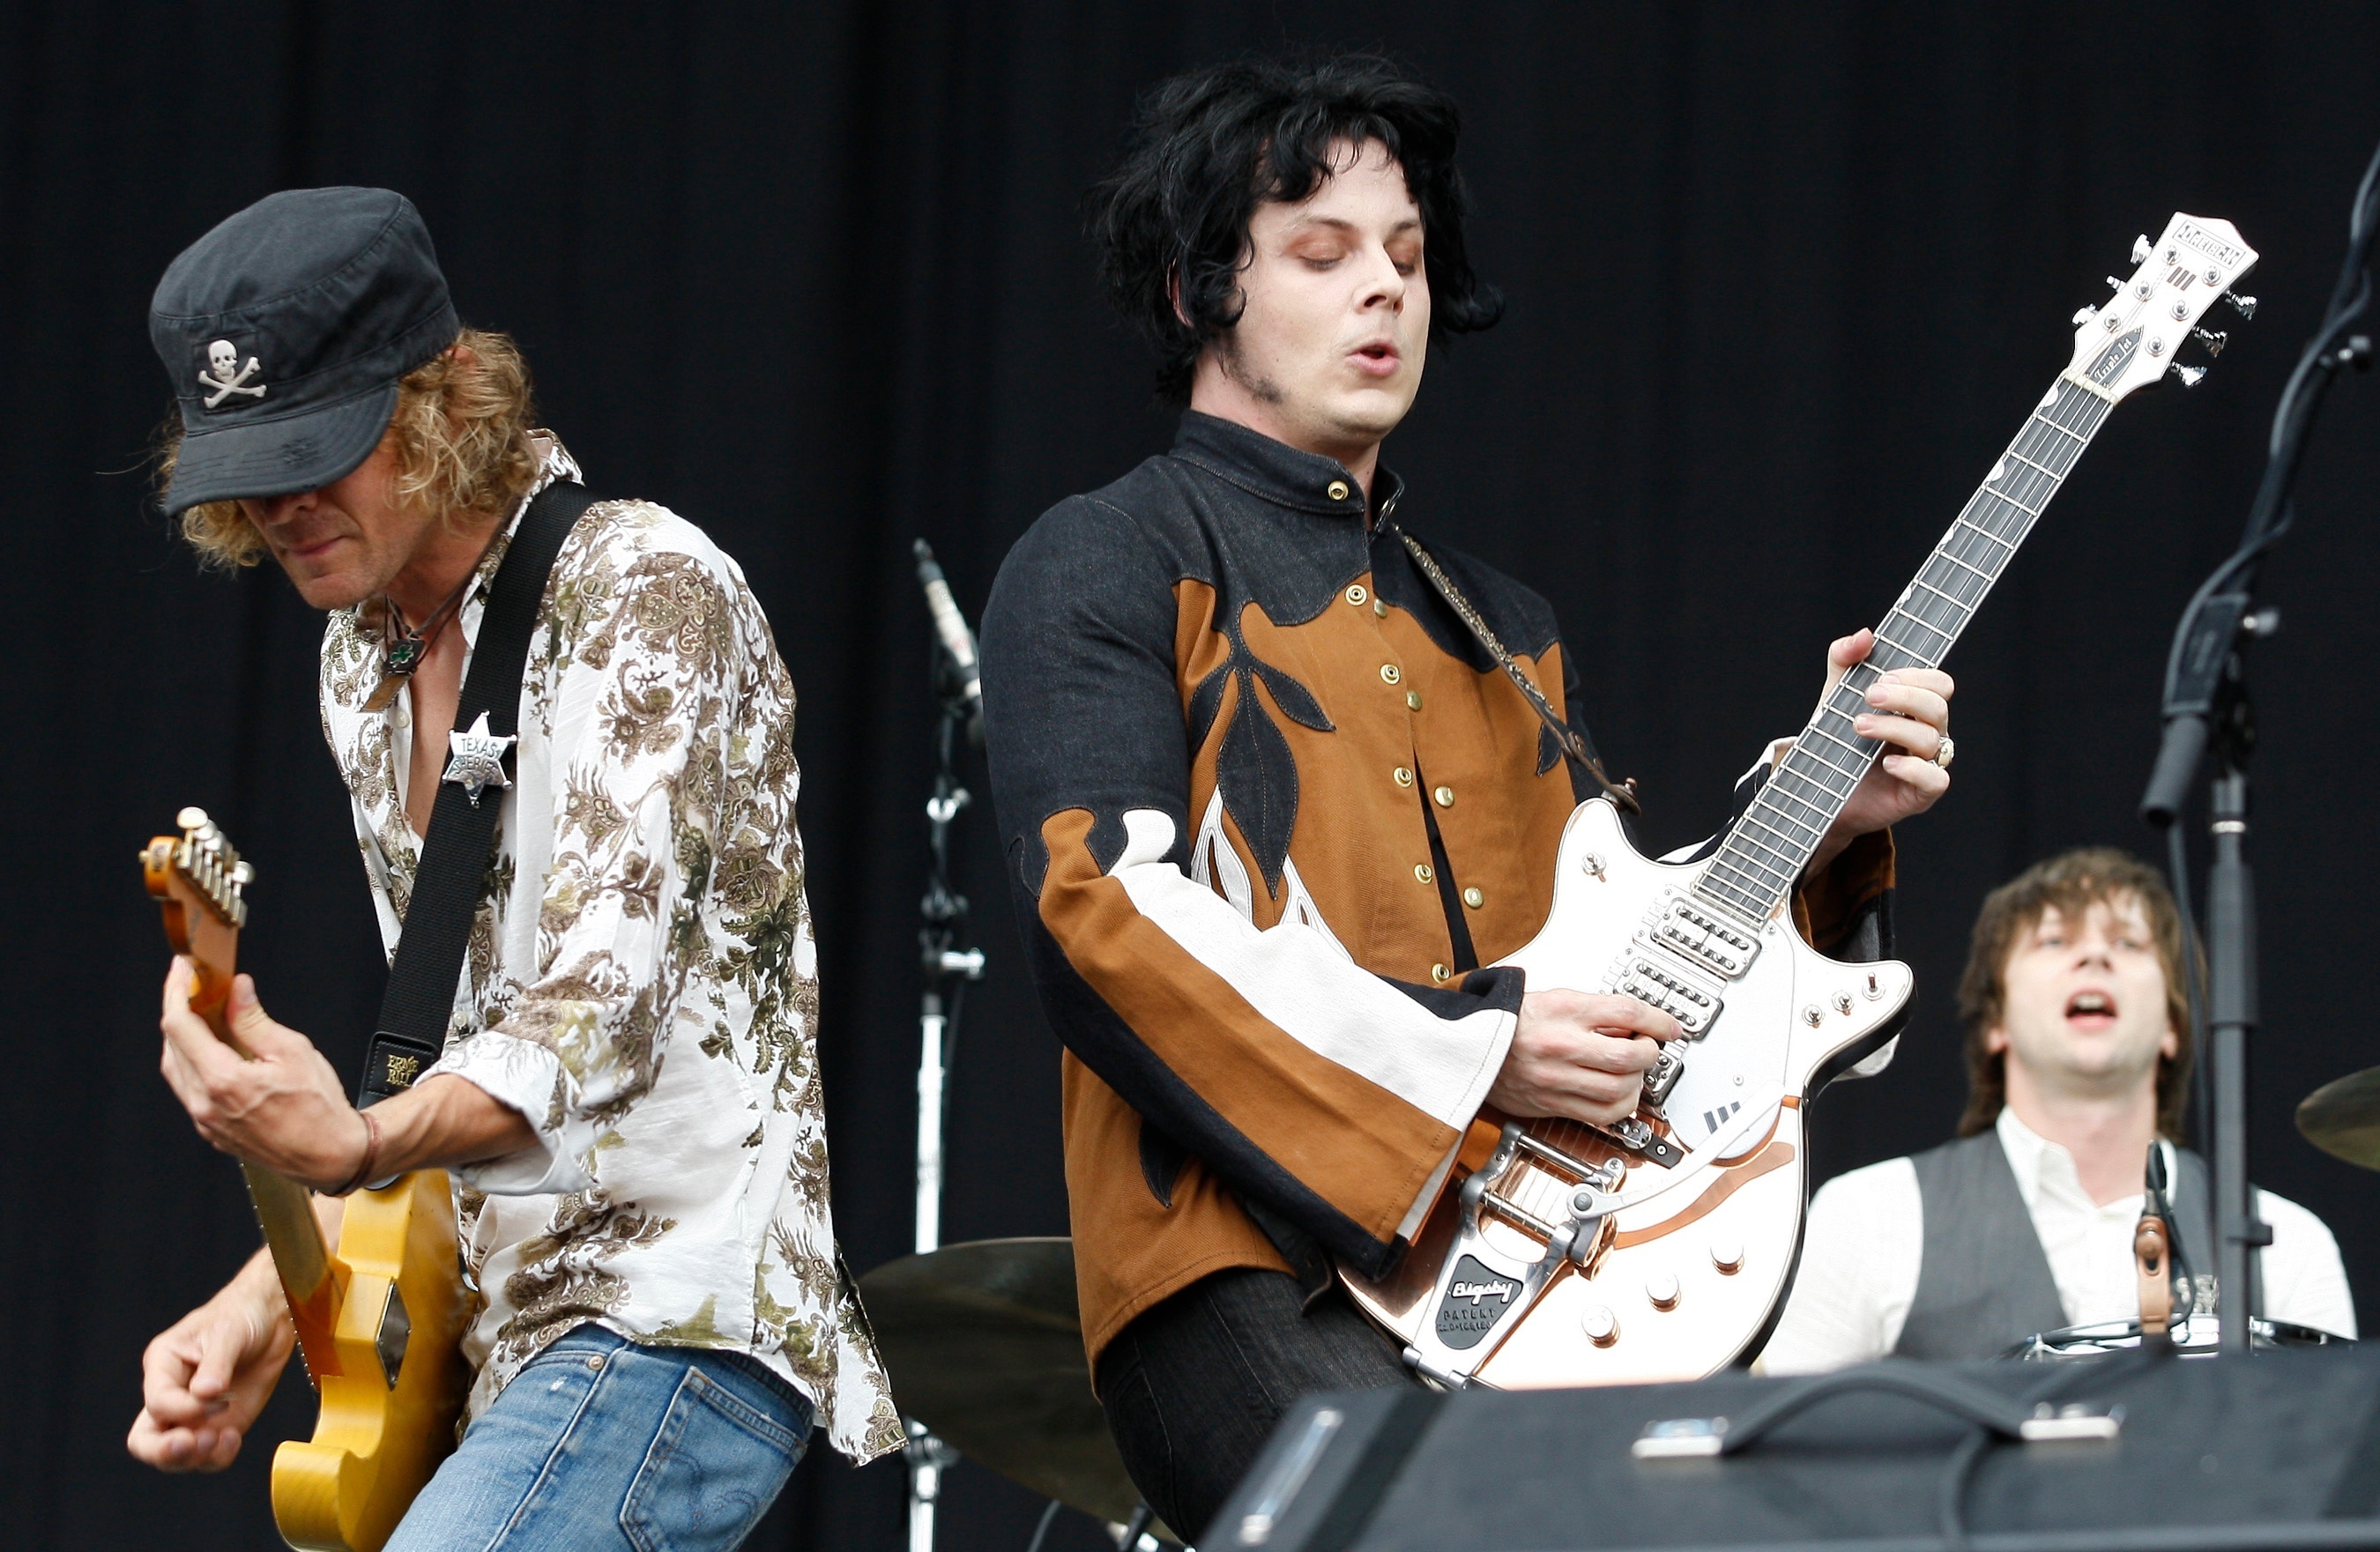 Jack White and Brendan Benson on reforming The Raconteurs, finding musical freedom and their new album | The Sun 2700x1770